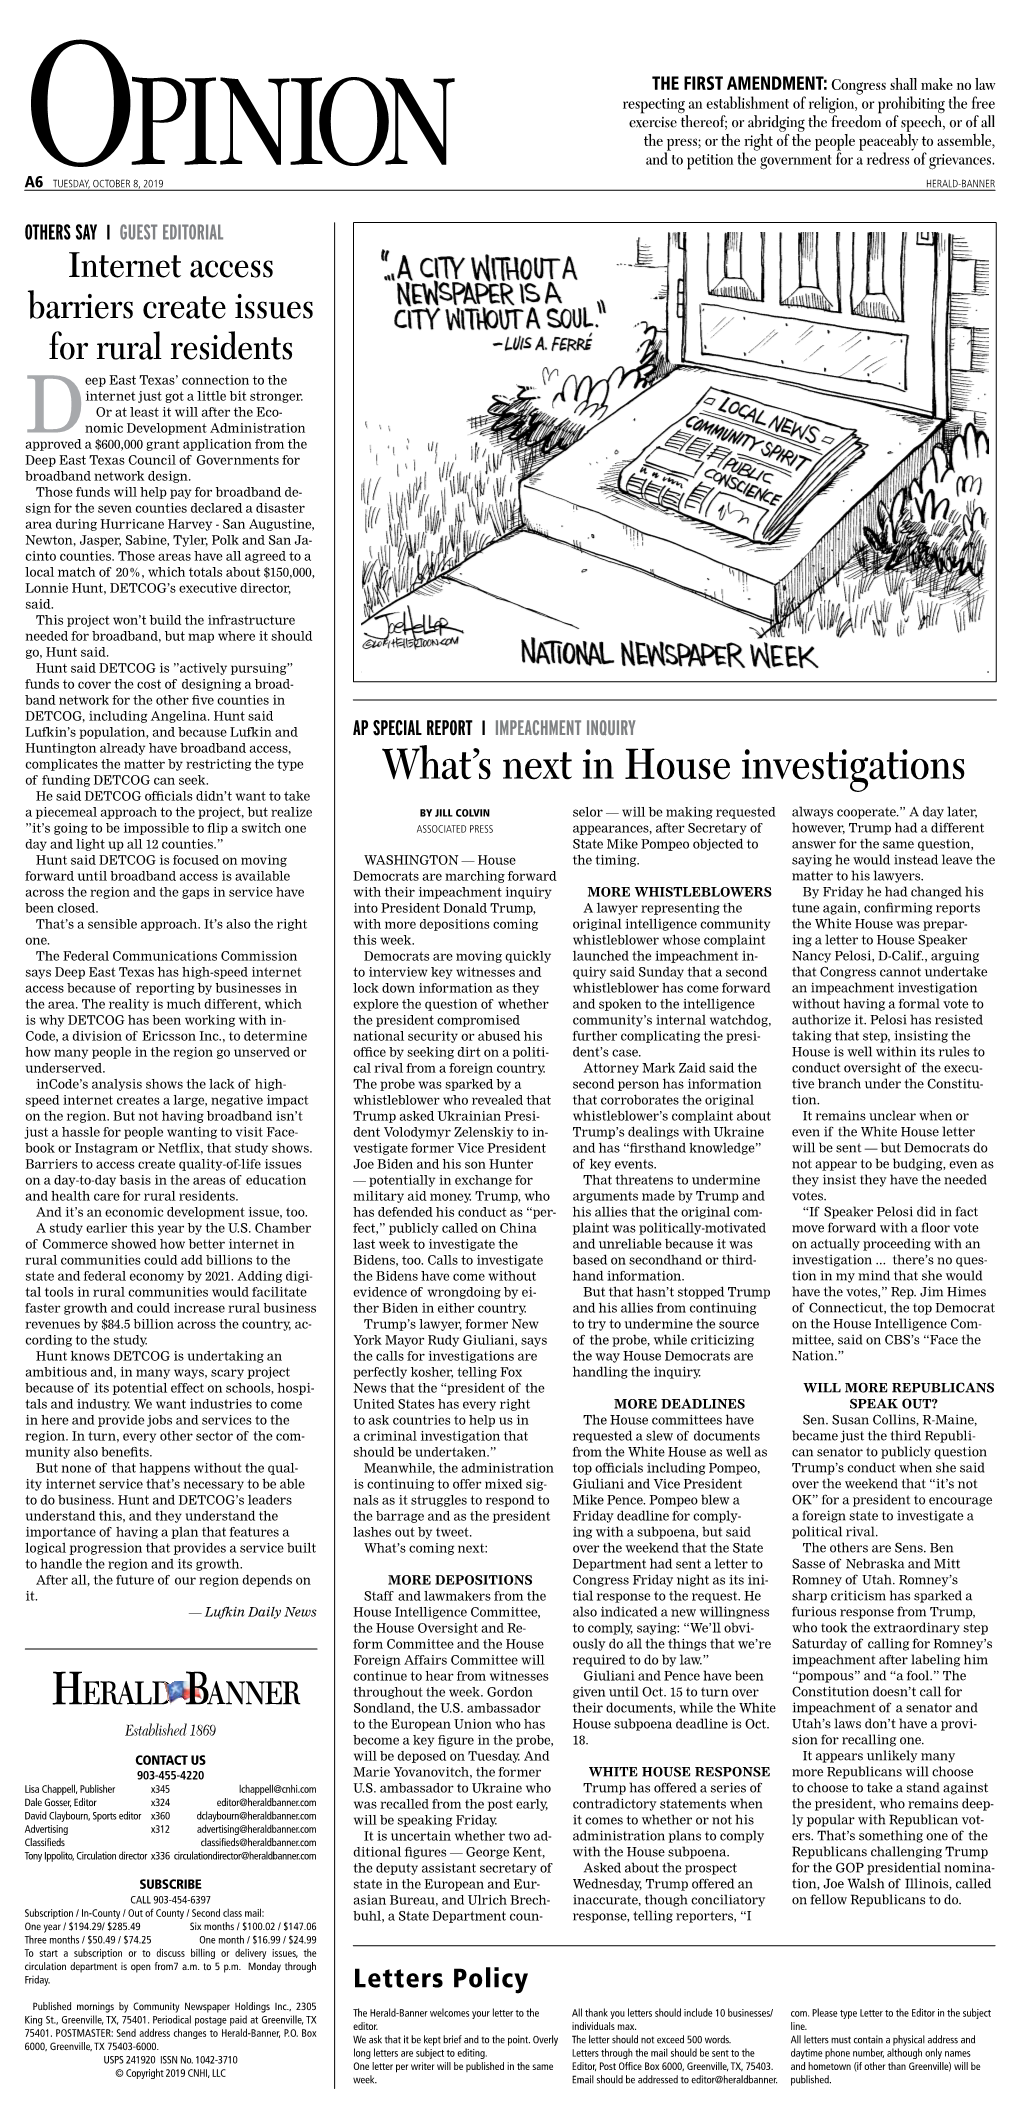 What's Next in House Investigations